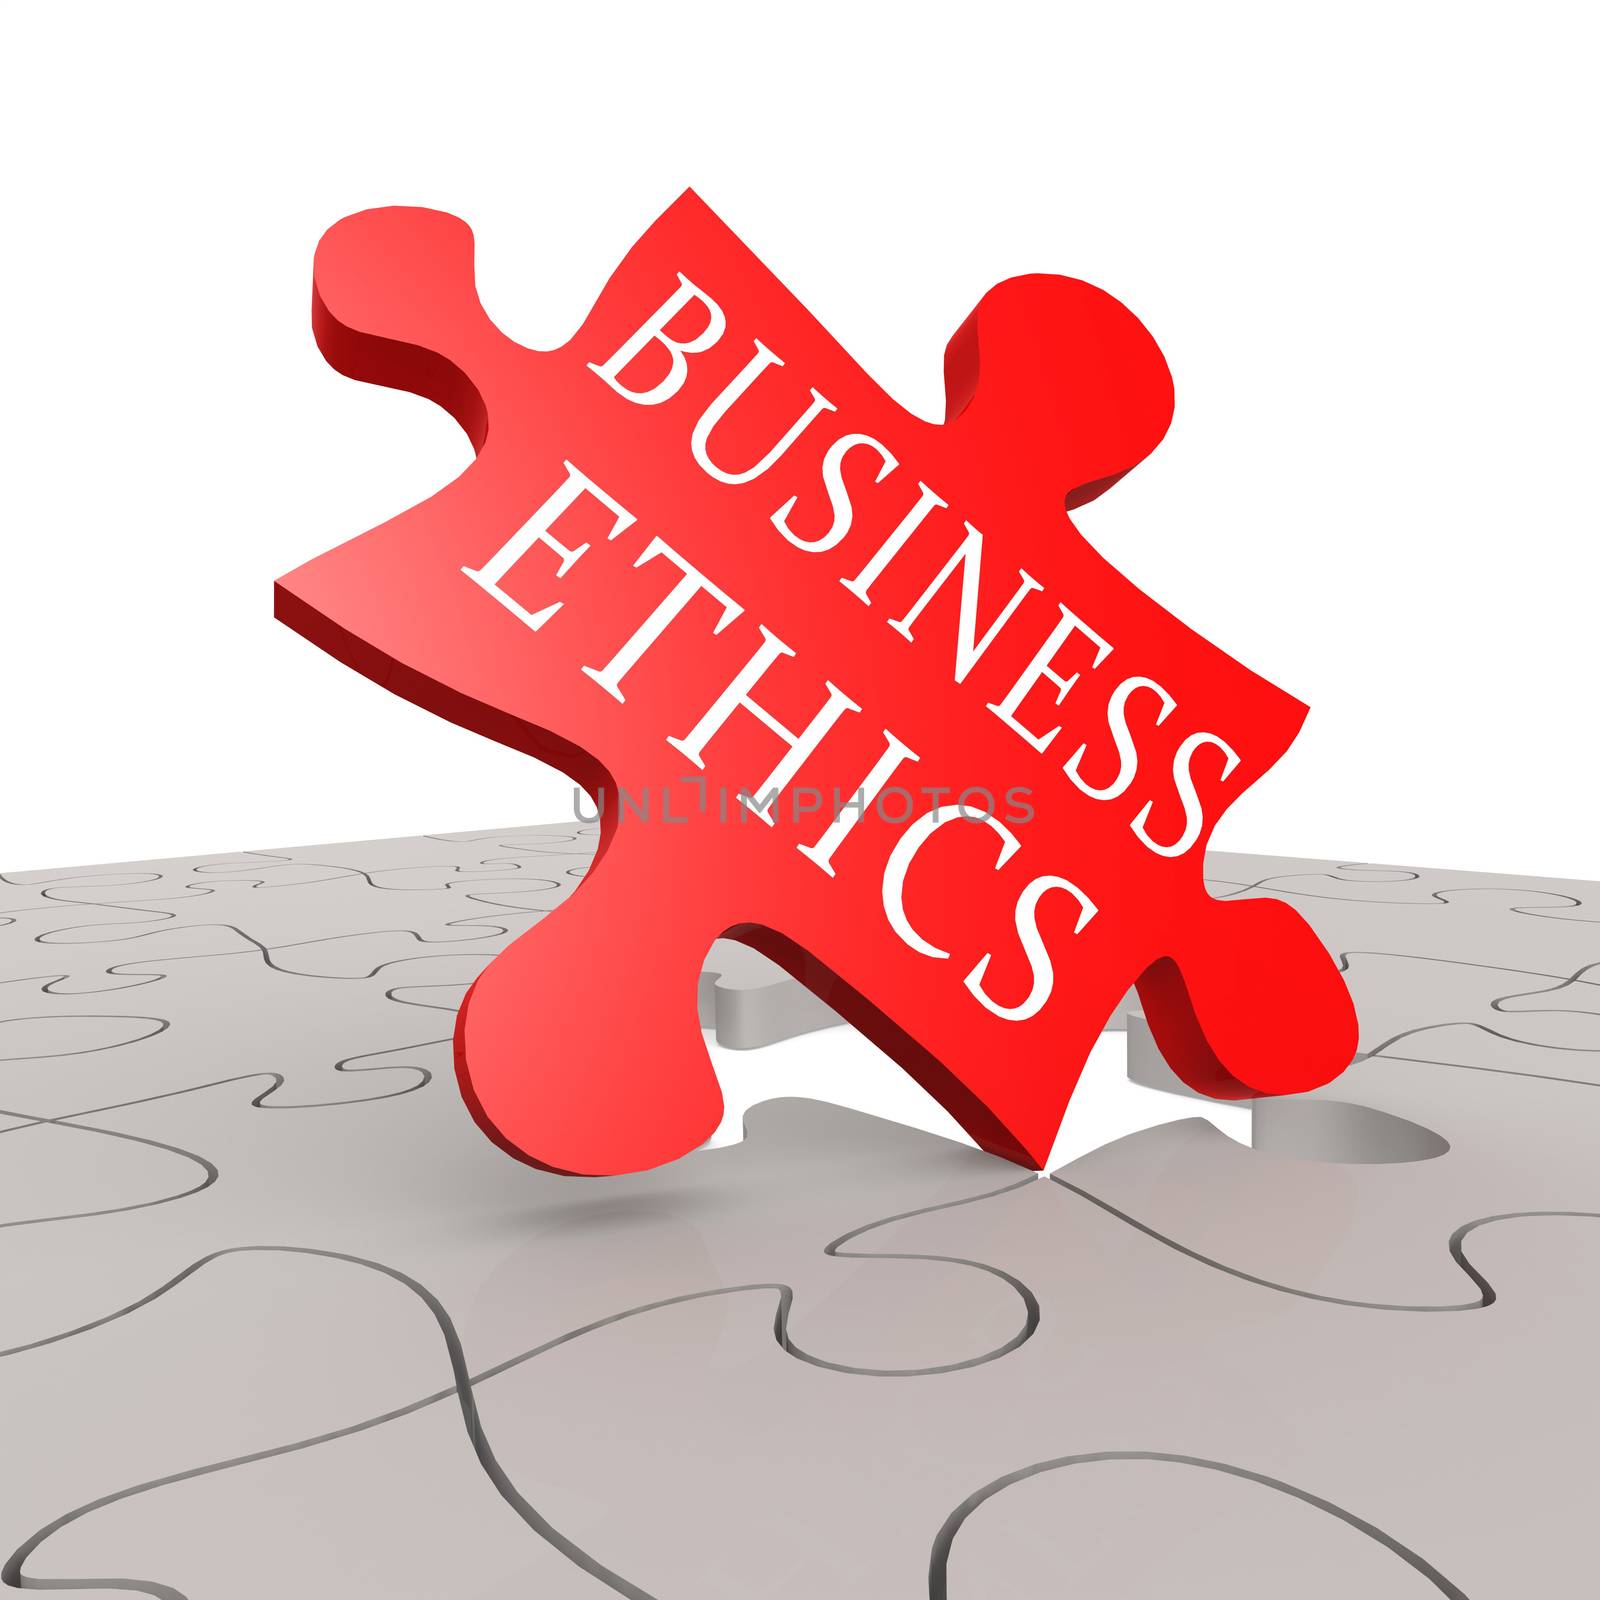 Business ethics puzzle by tang90246